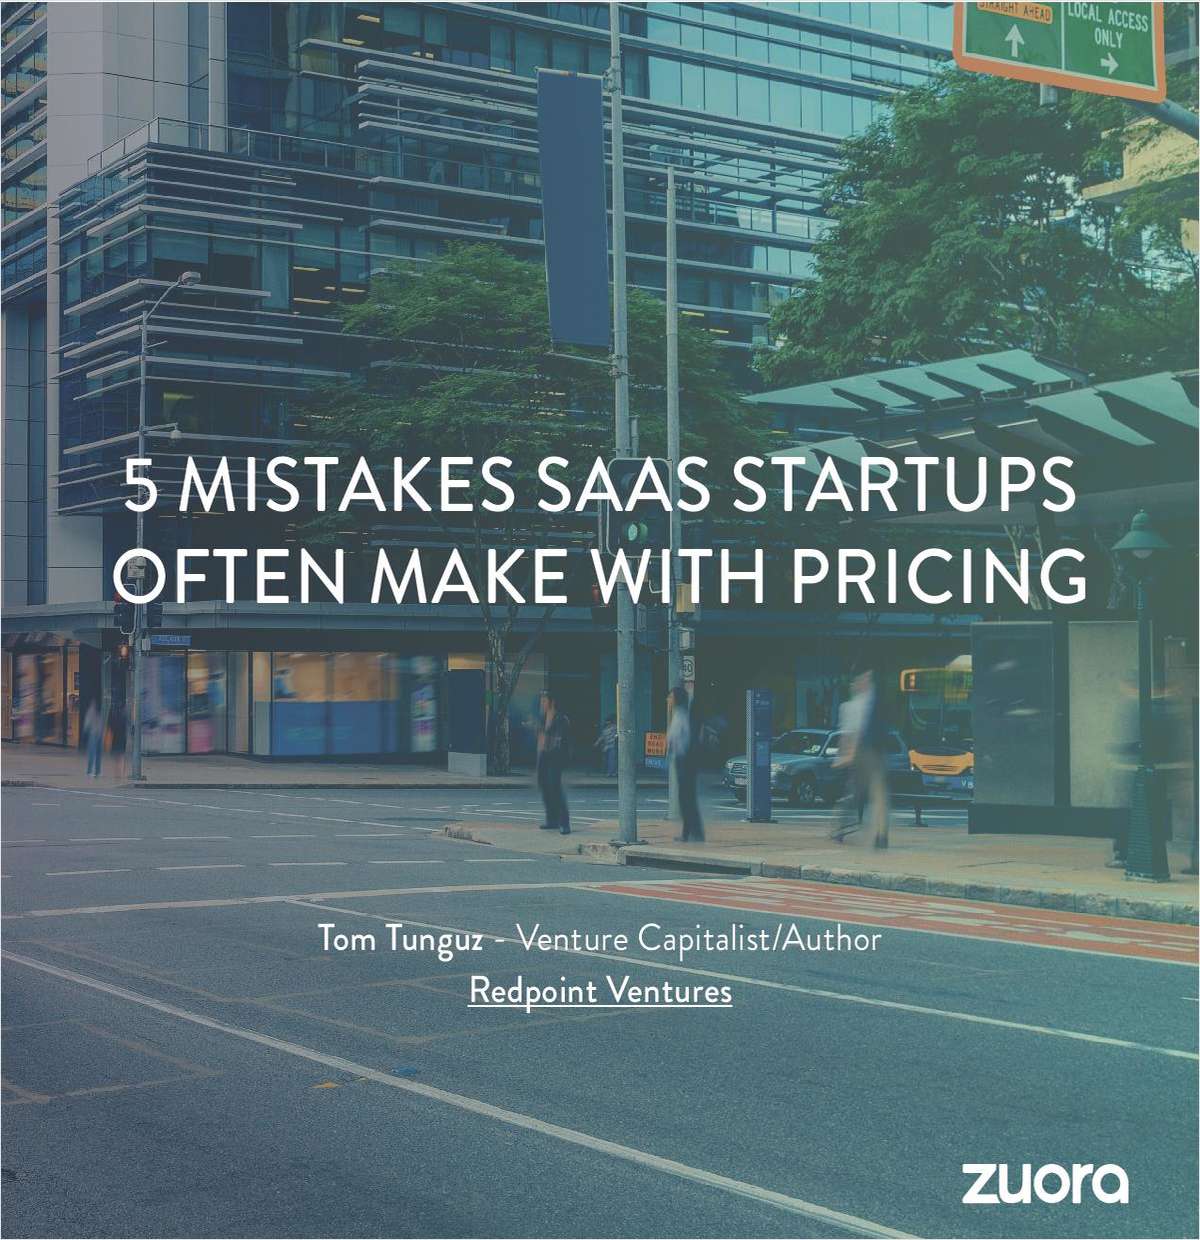 5 Pricing Mistakes SaaS Companies Should Not Make